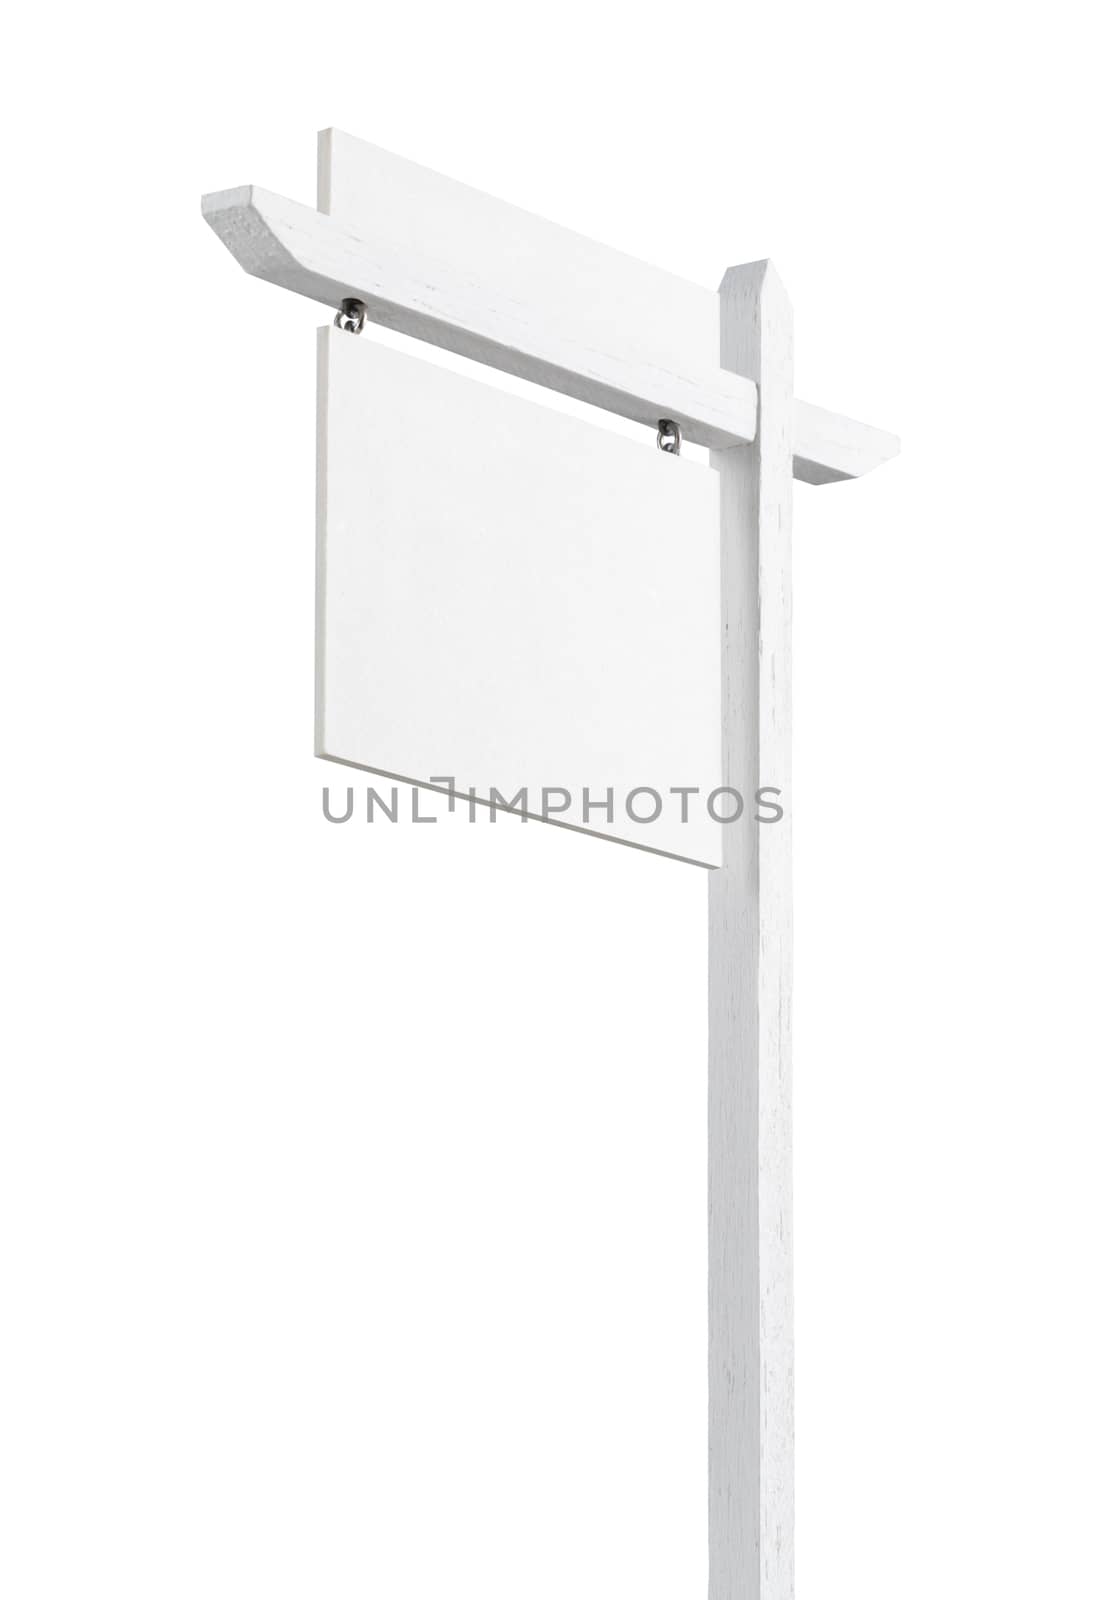 Blank Real Estate Sign with Upper Placard Ready For Your Own Tex by Feverpitched